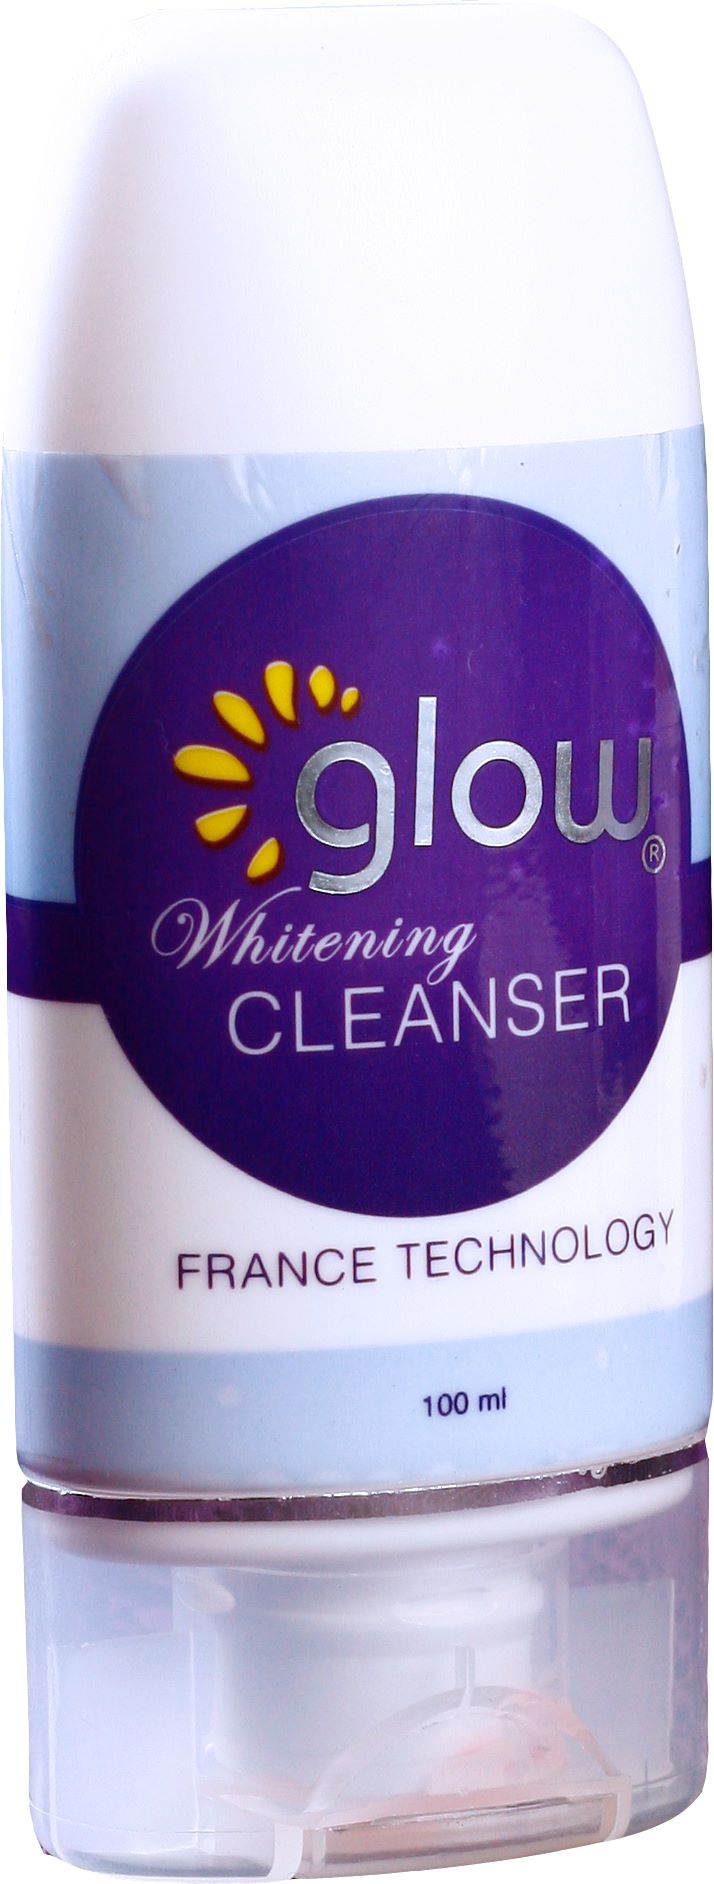 Products - Glow Whitening Cleanser Malaysia by Chitra's 